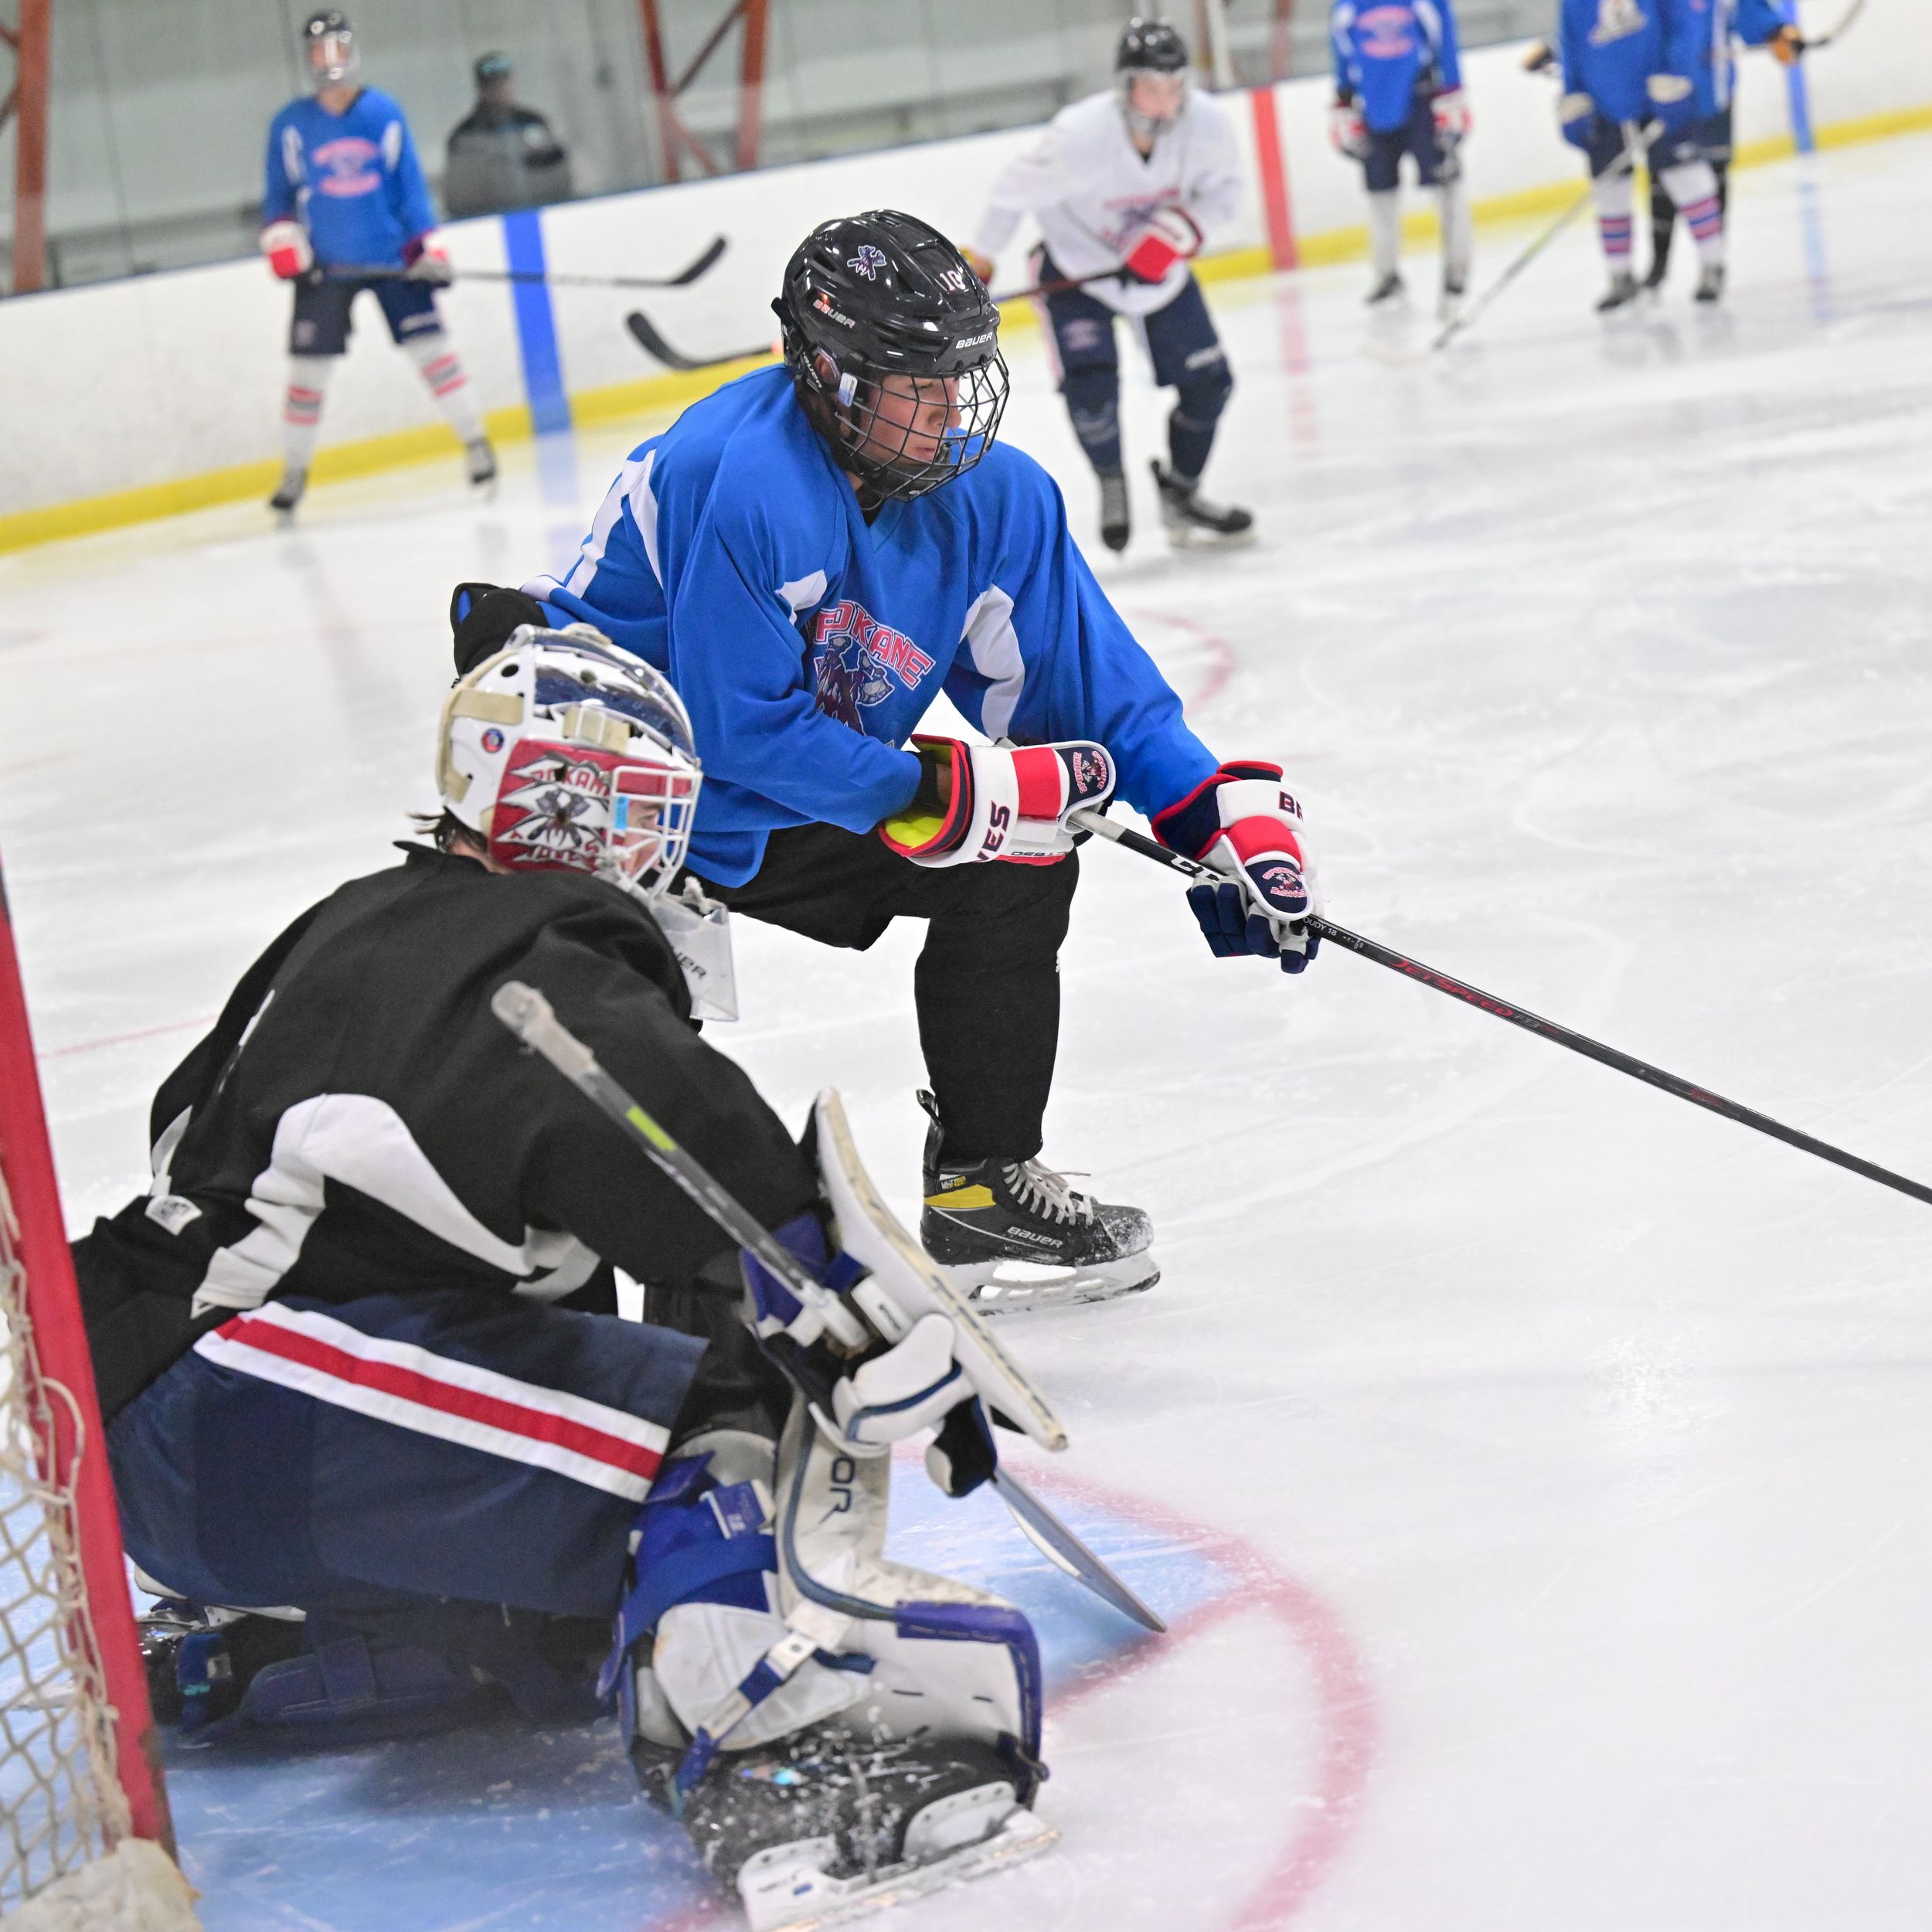 Spokane Braves junior hockey returns to the ice for first season since  COVID-19 pandemic